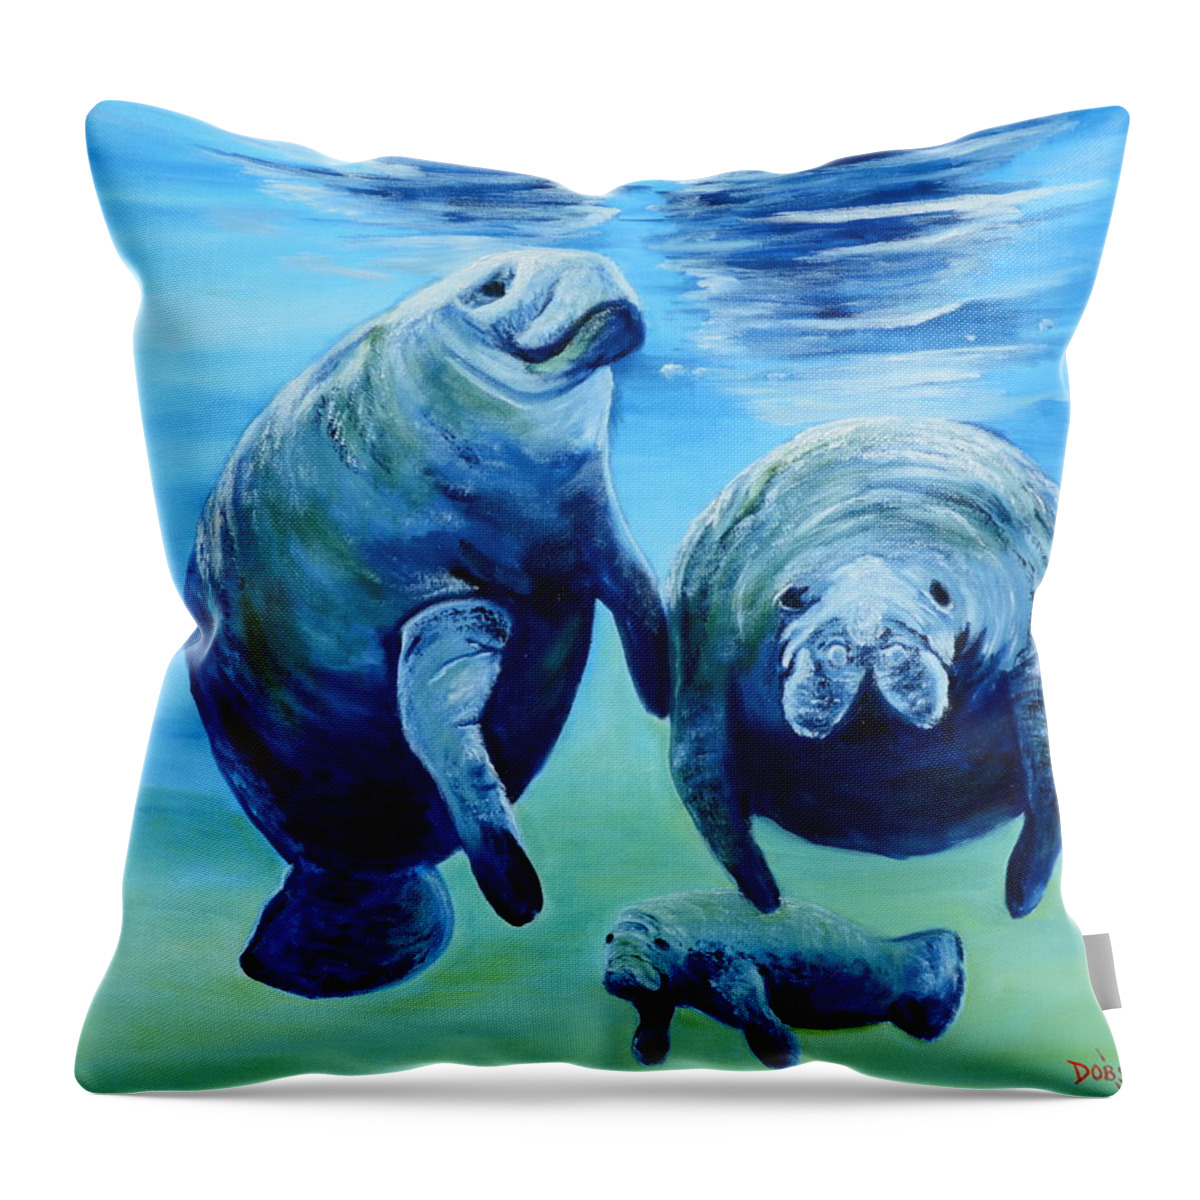 Manatee Throw Pillow featuring the painting A Manatee Family by Lloyd Dobson